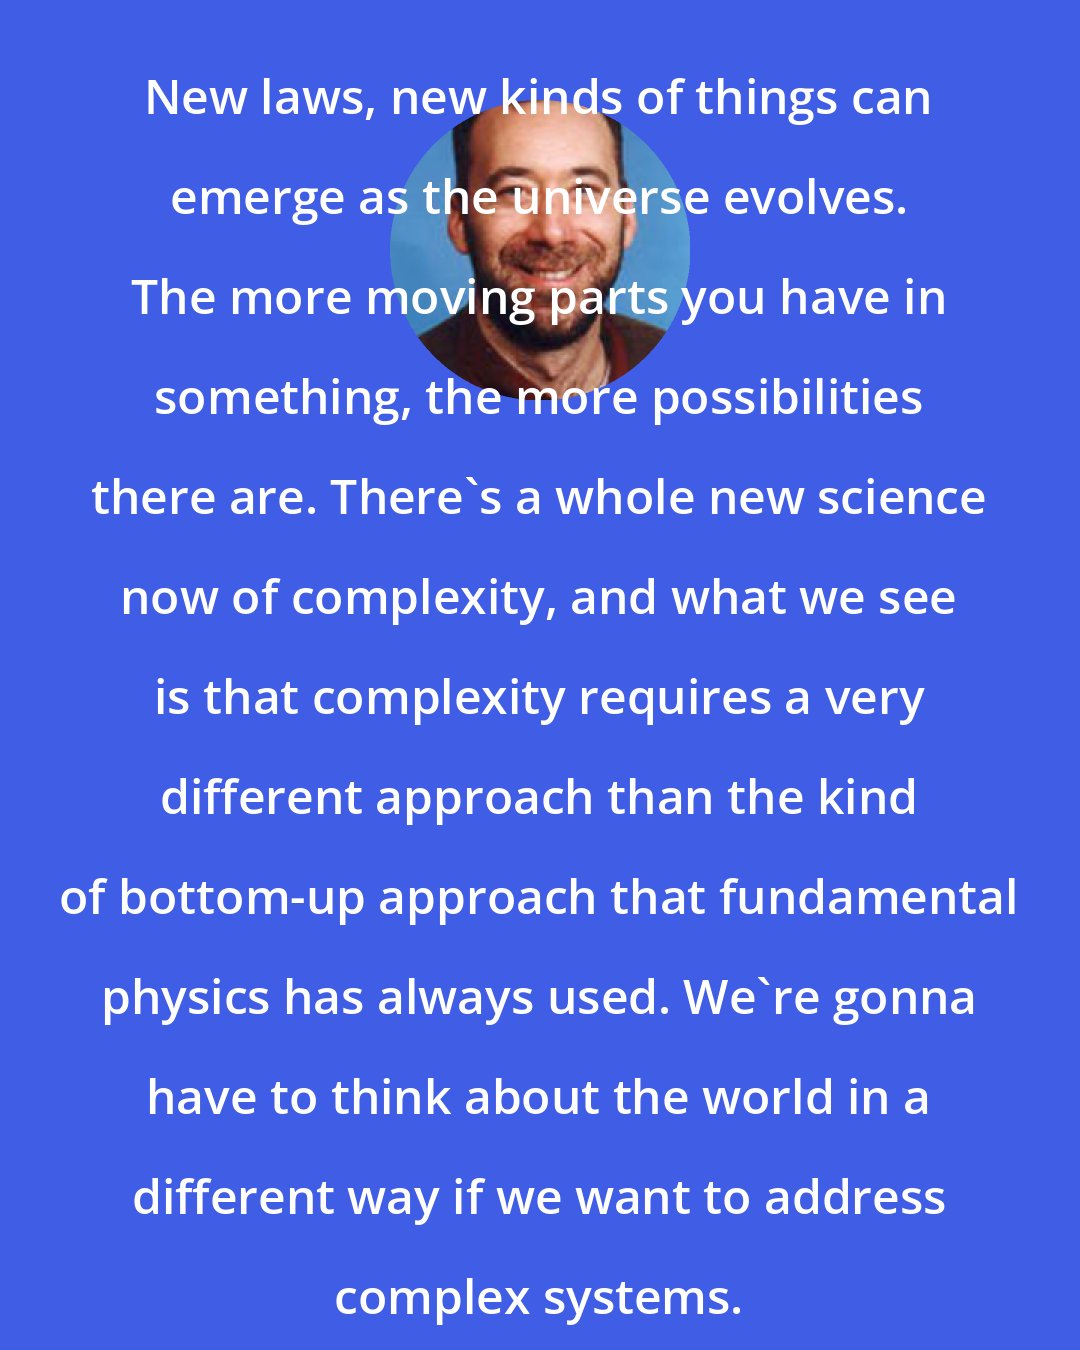 Adam Frank: New laws, new kinds of things can emerge as the universe evolves. The more moving parts you have in something, the more possibilities there are. There's a whole new science now of complexity, and what we see is that complexity requires a very different approach than the kind of bottom-up approach that fundamental physics has always used. We're gonna have to think about the world in a different way if we want to address complex systems.